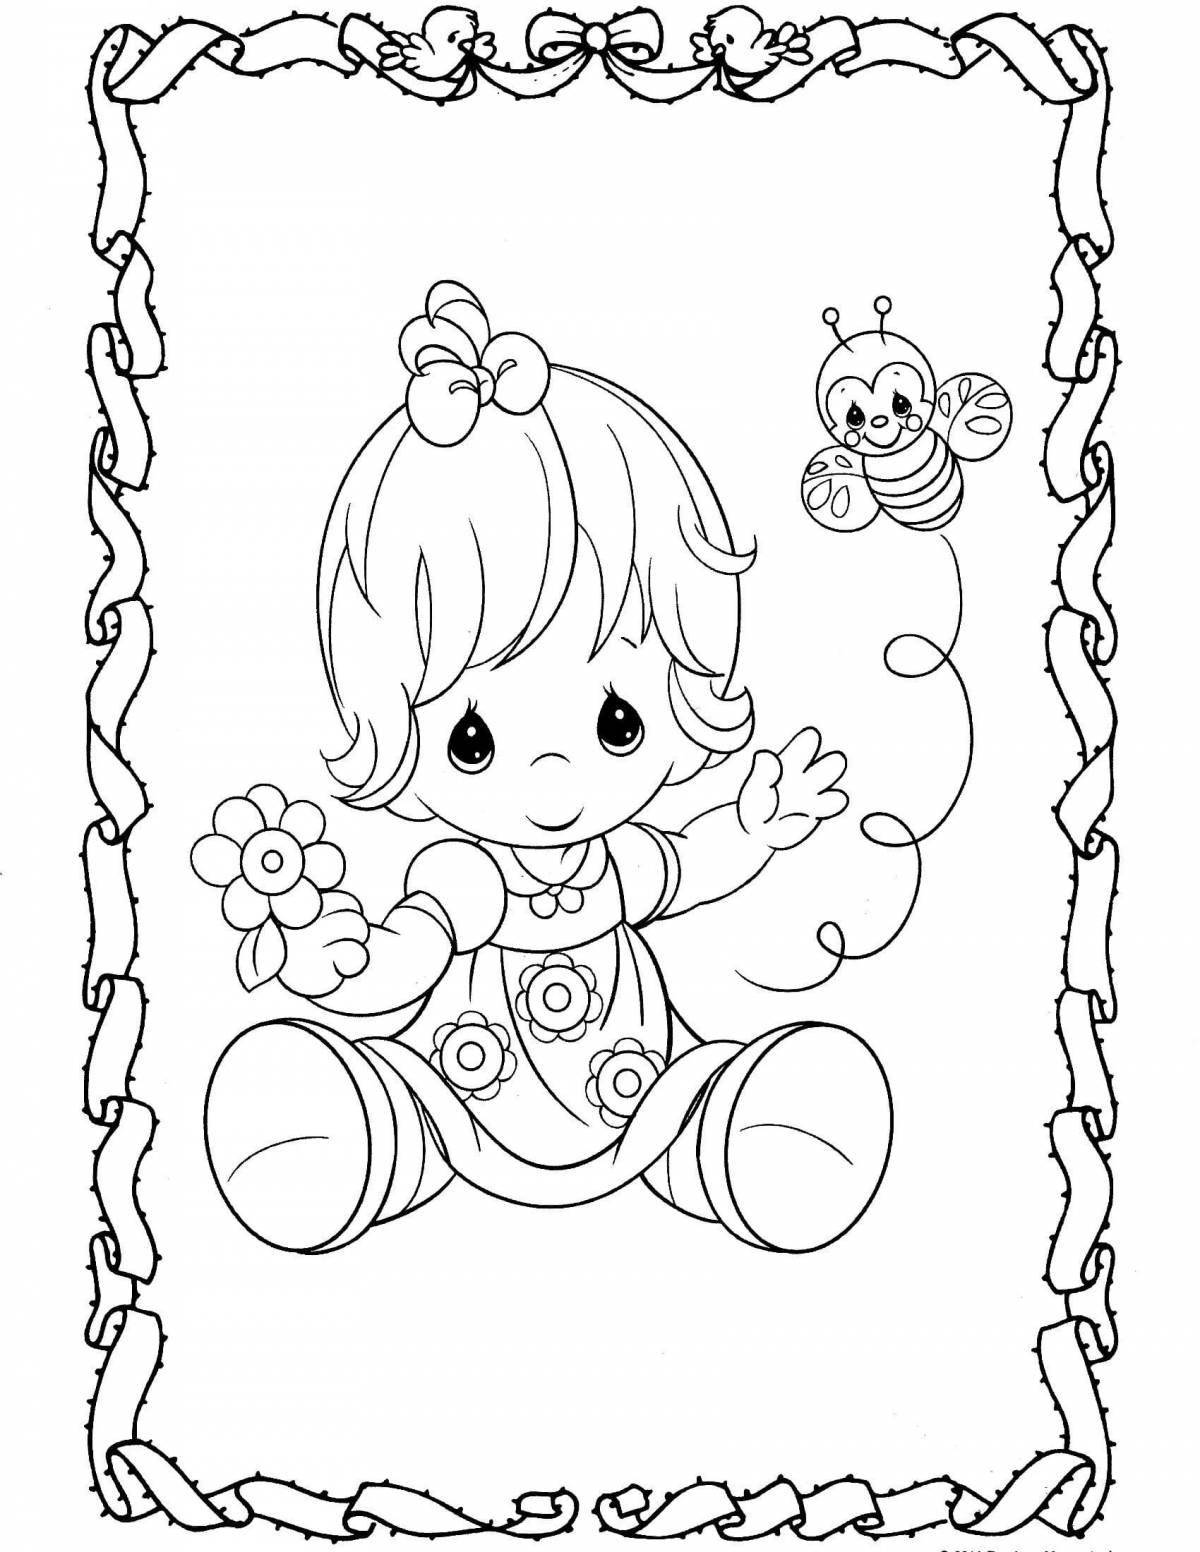 Color explosion lala coloring page